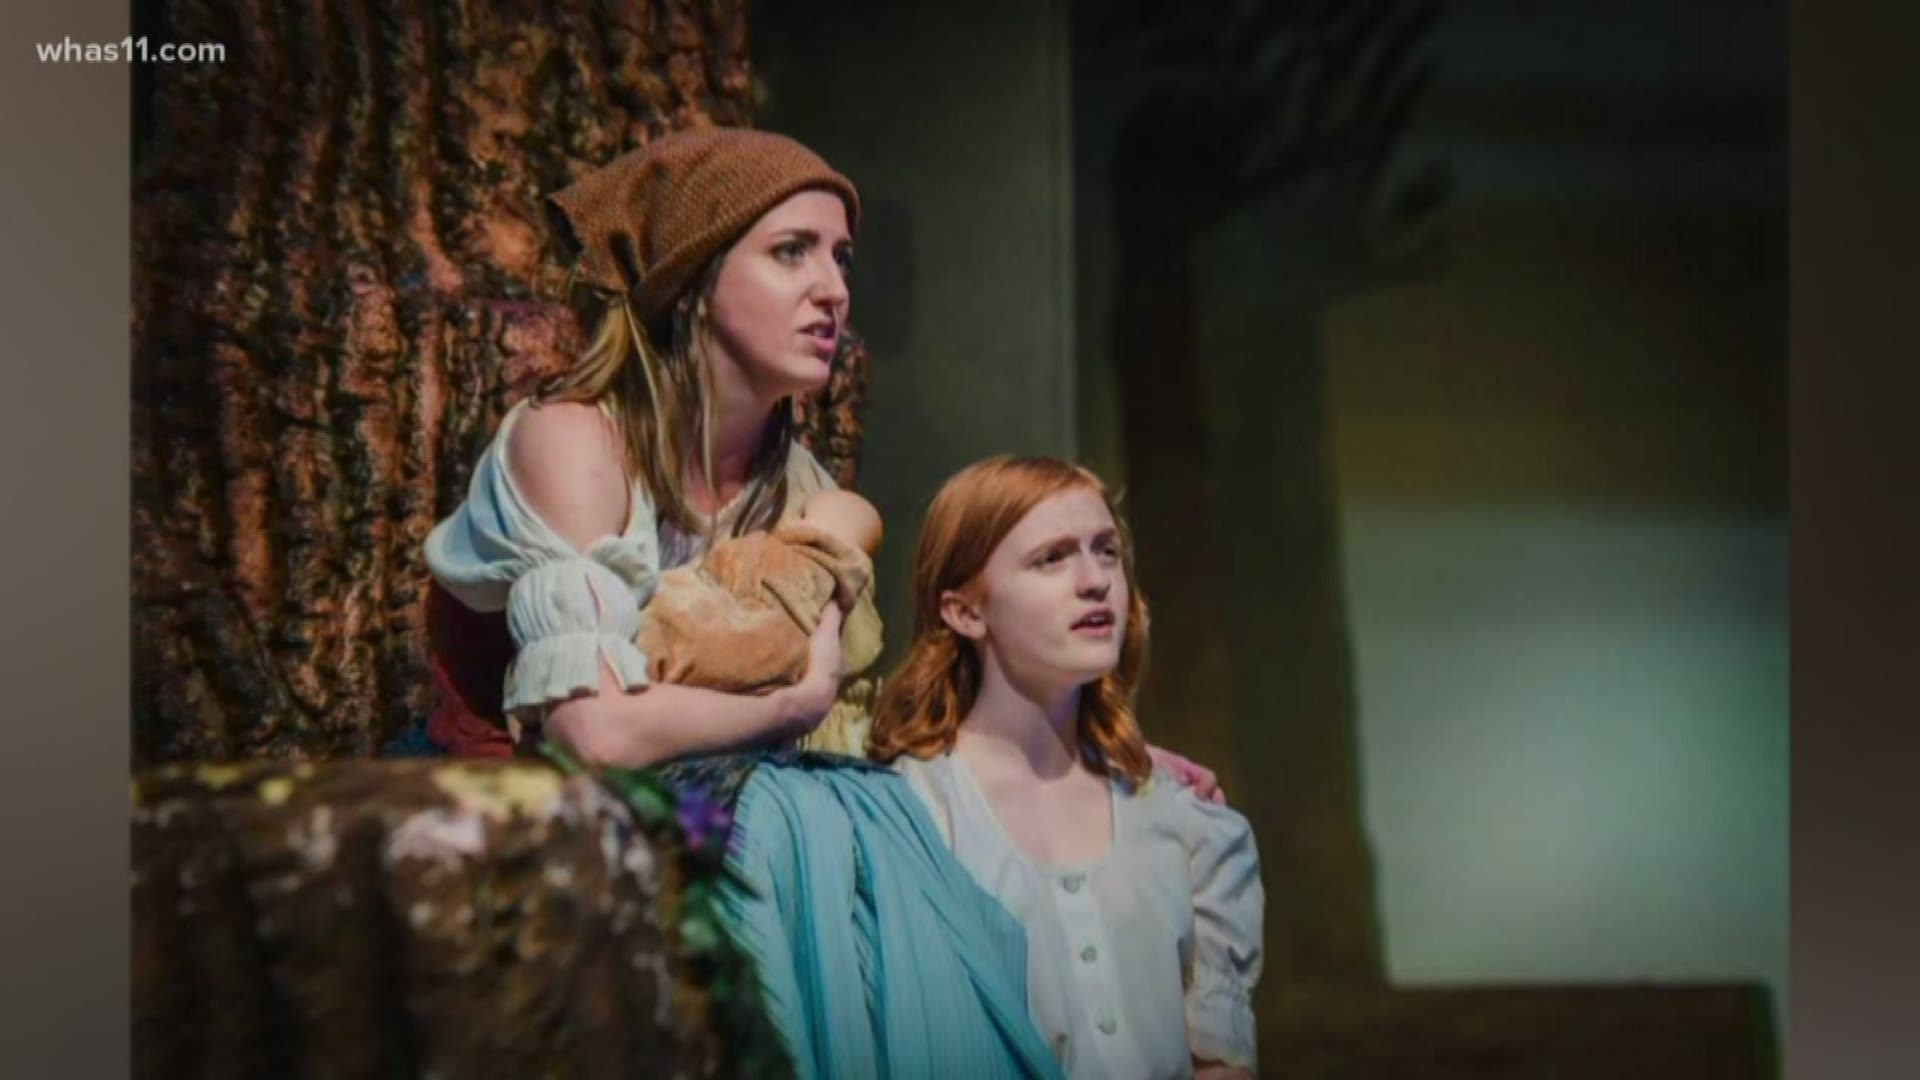 Juliana Valencia talks to Performance and Visual Arts Director Frank Goodloe and performer Erin Jump about CenterStage's production of "Into the Woods"